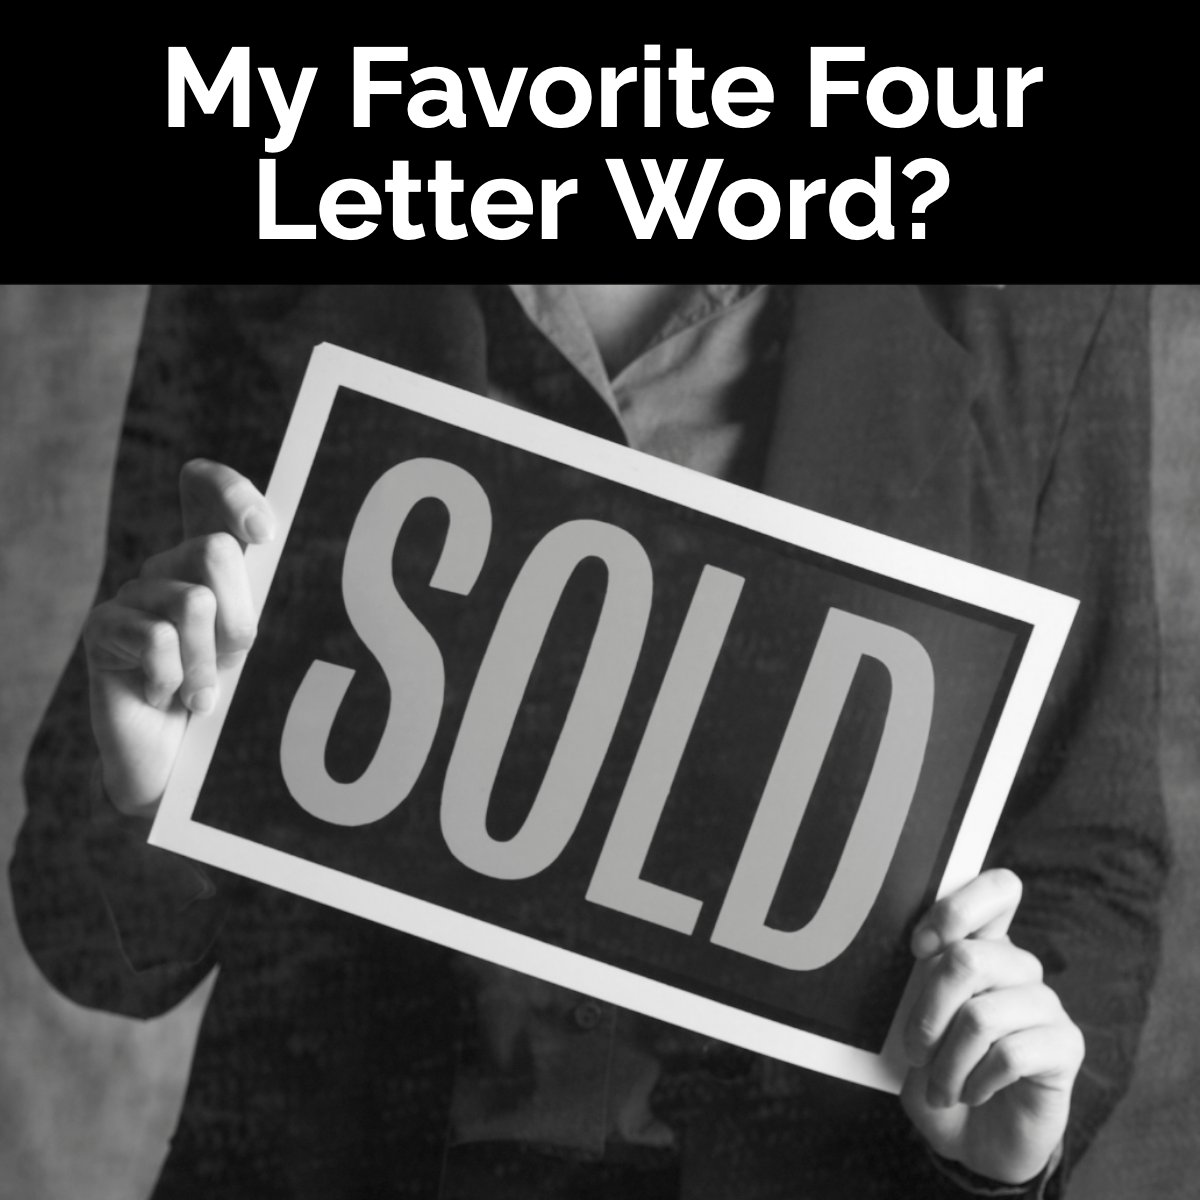 S-O-L-D

What's yours? 💰 💸 🤑

#sold #realestate101 #realestatehumor #favoriteword #fourletters 
 #TheBasileHomeTeam